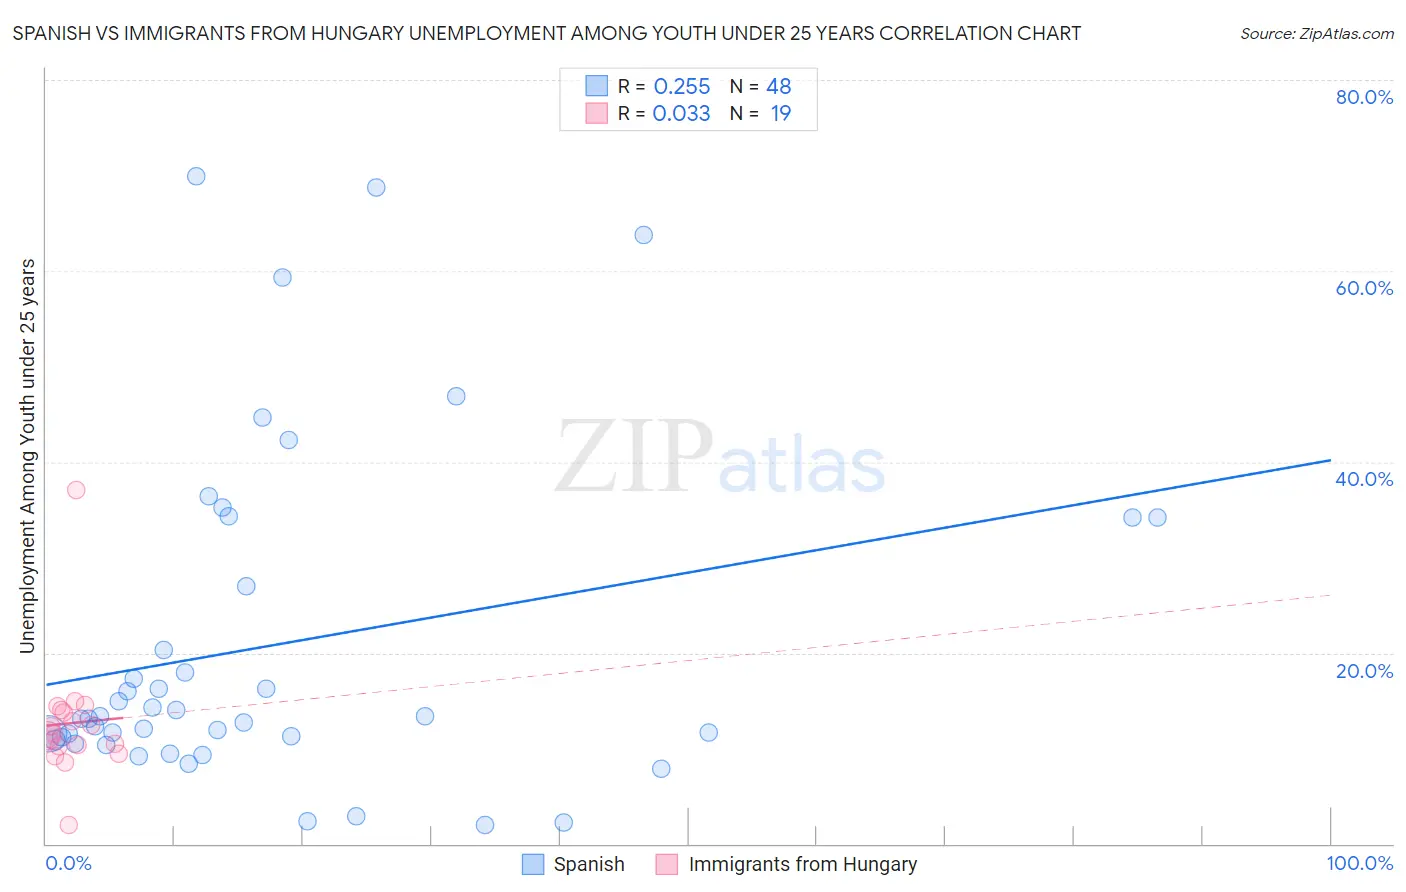 Spanish vs Immigrants from Hungary Unemployment Among Youth under 25 years